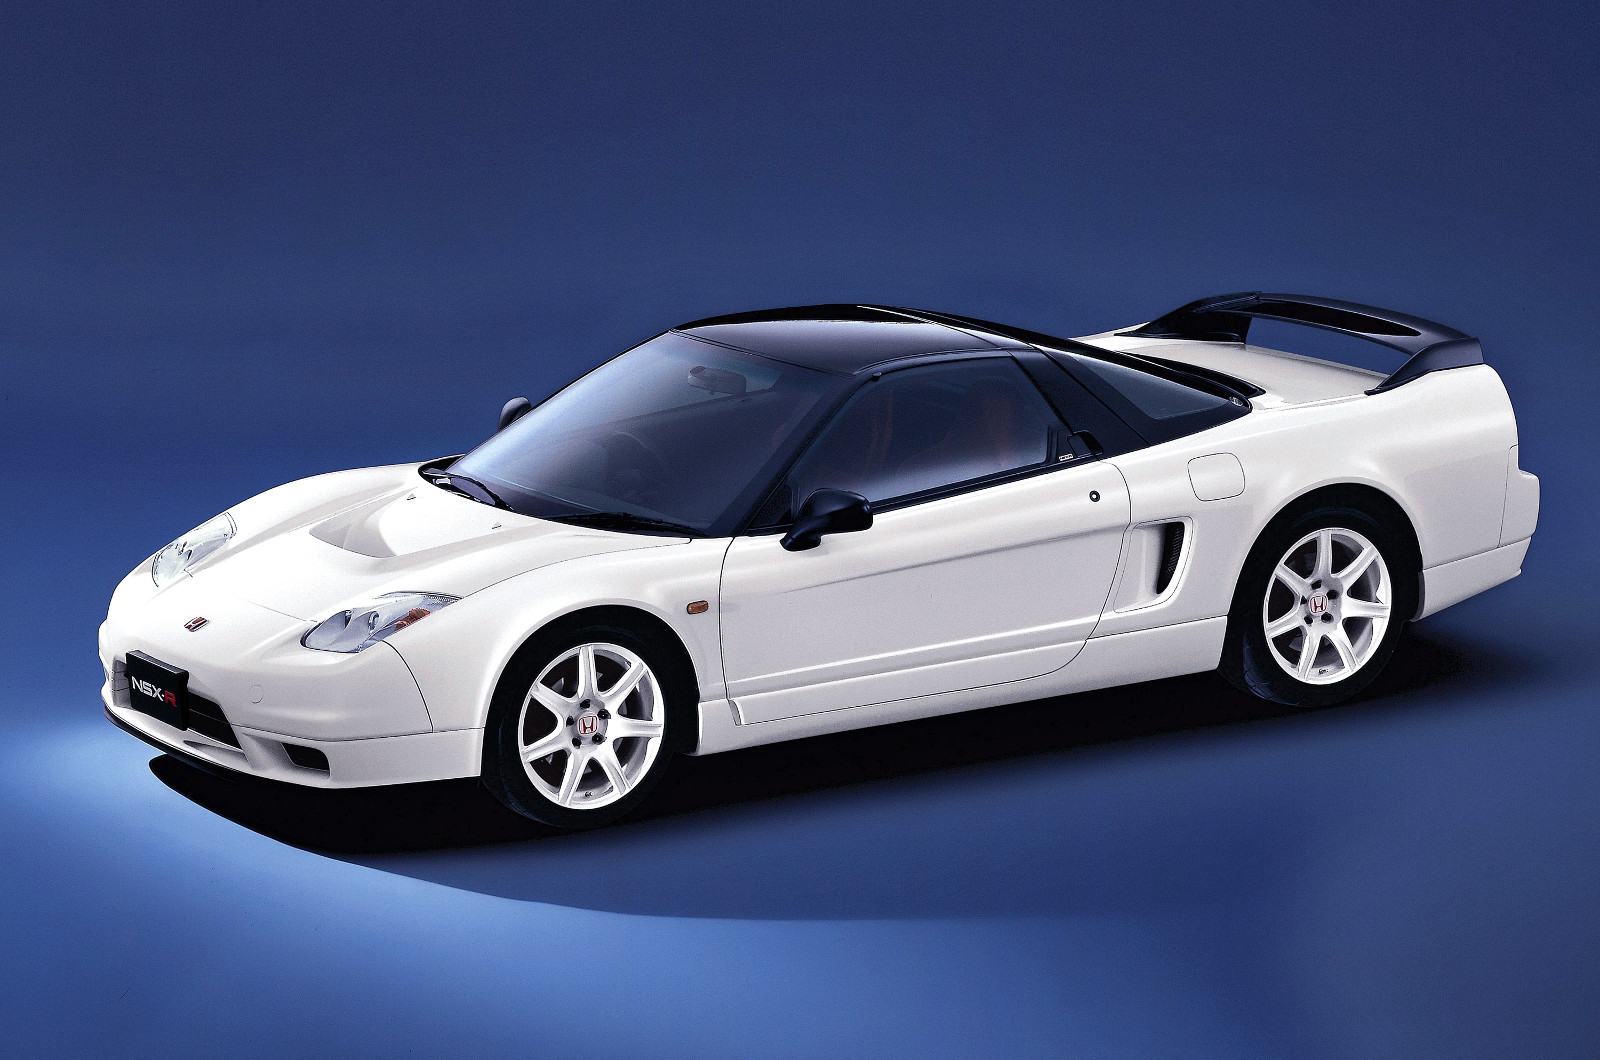 30 years of the magnificent Honda NSX | Autocar